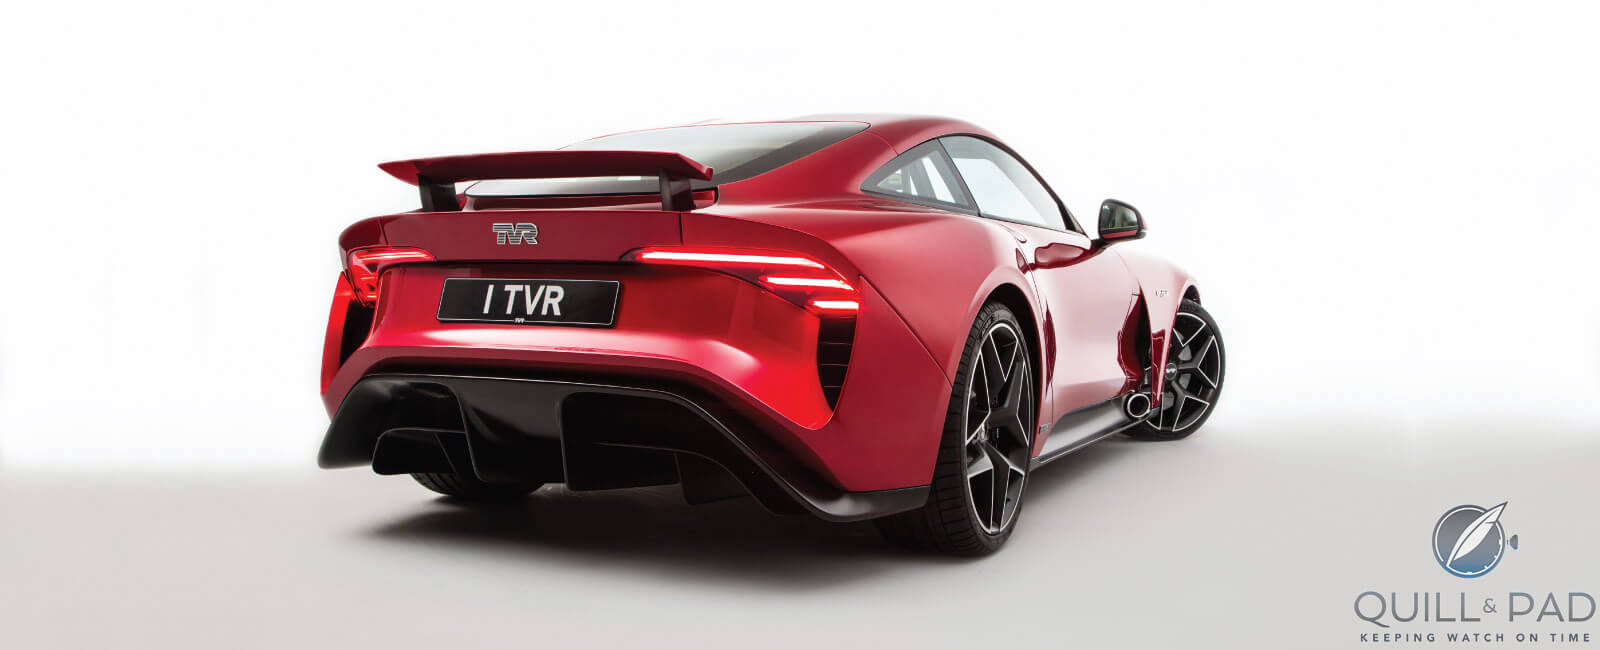 Back of the 2018 TVR Griffith